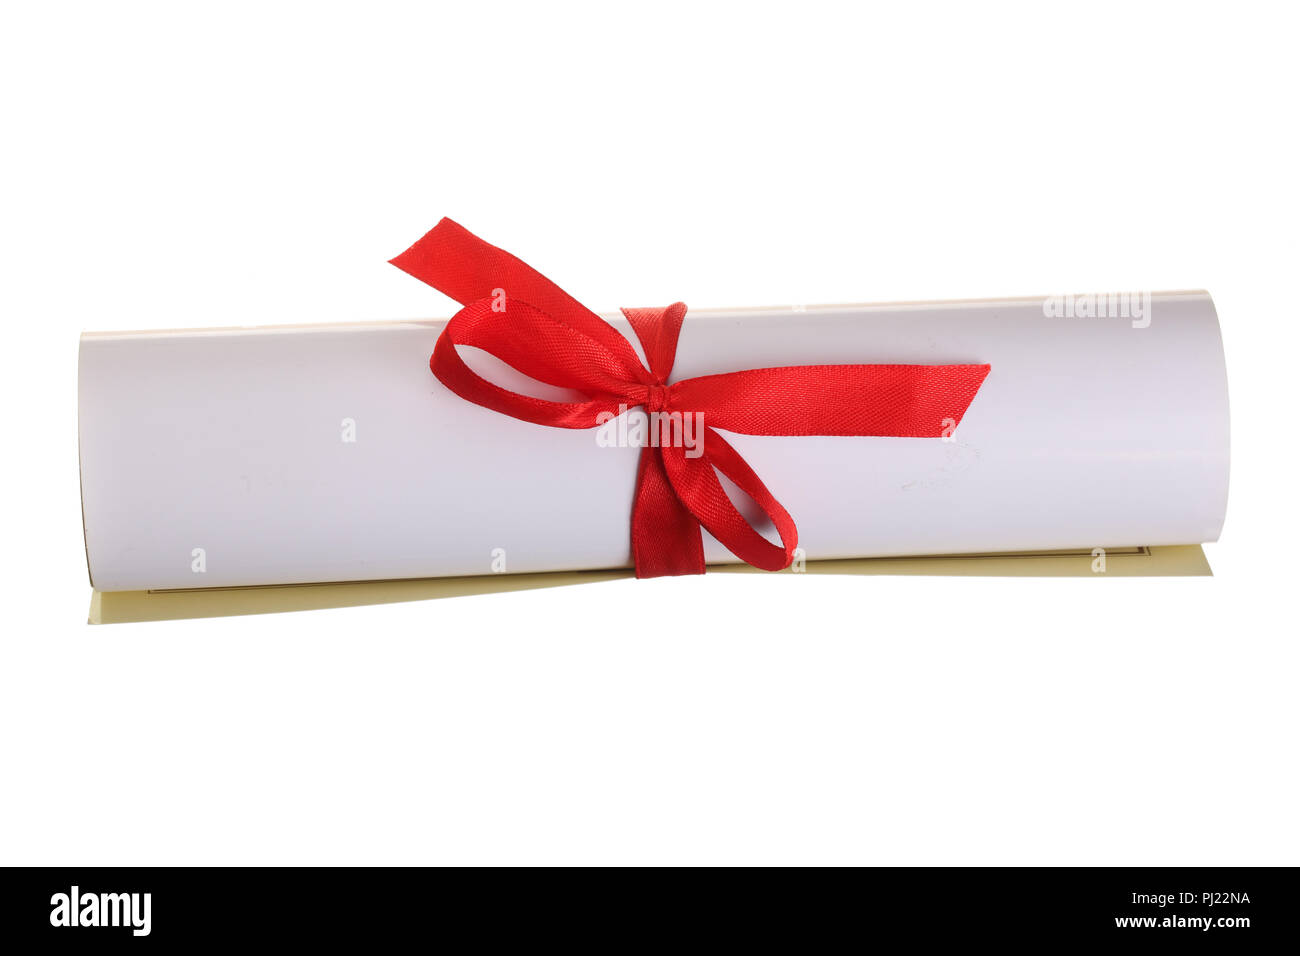 Diploma with red ribbon isolated on white background. Top view. Flat lay. Stock Photo